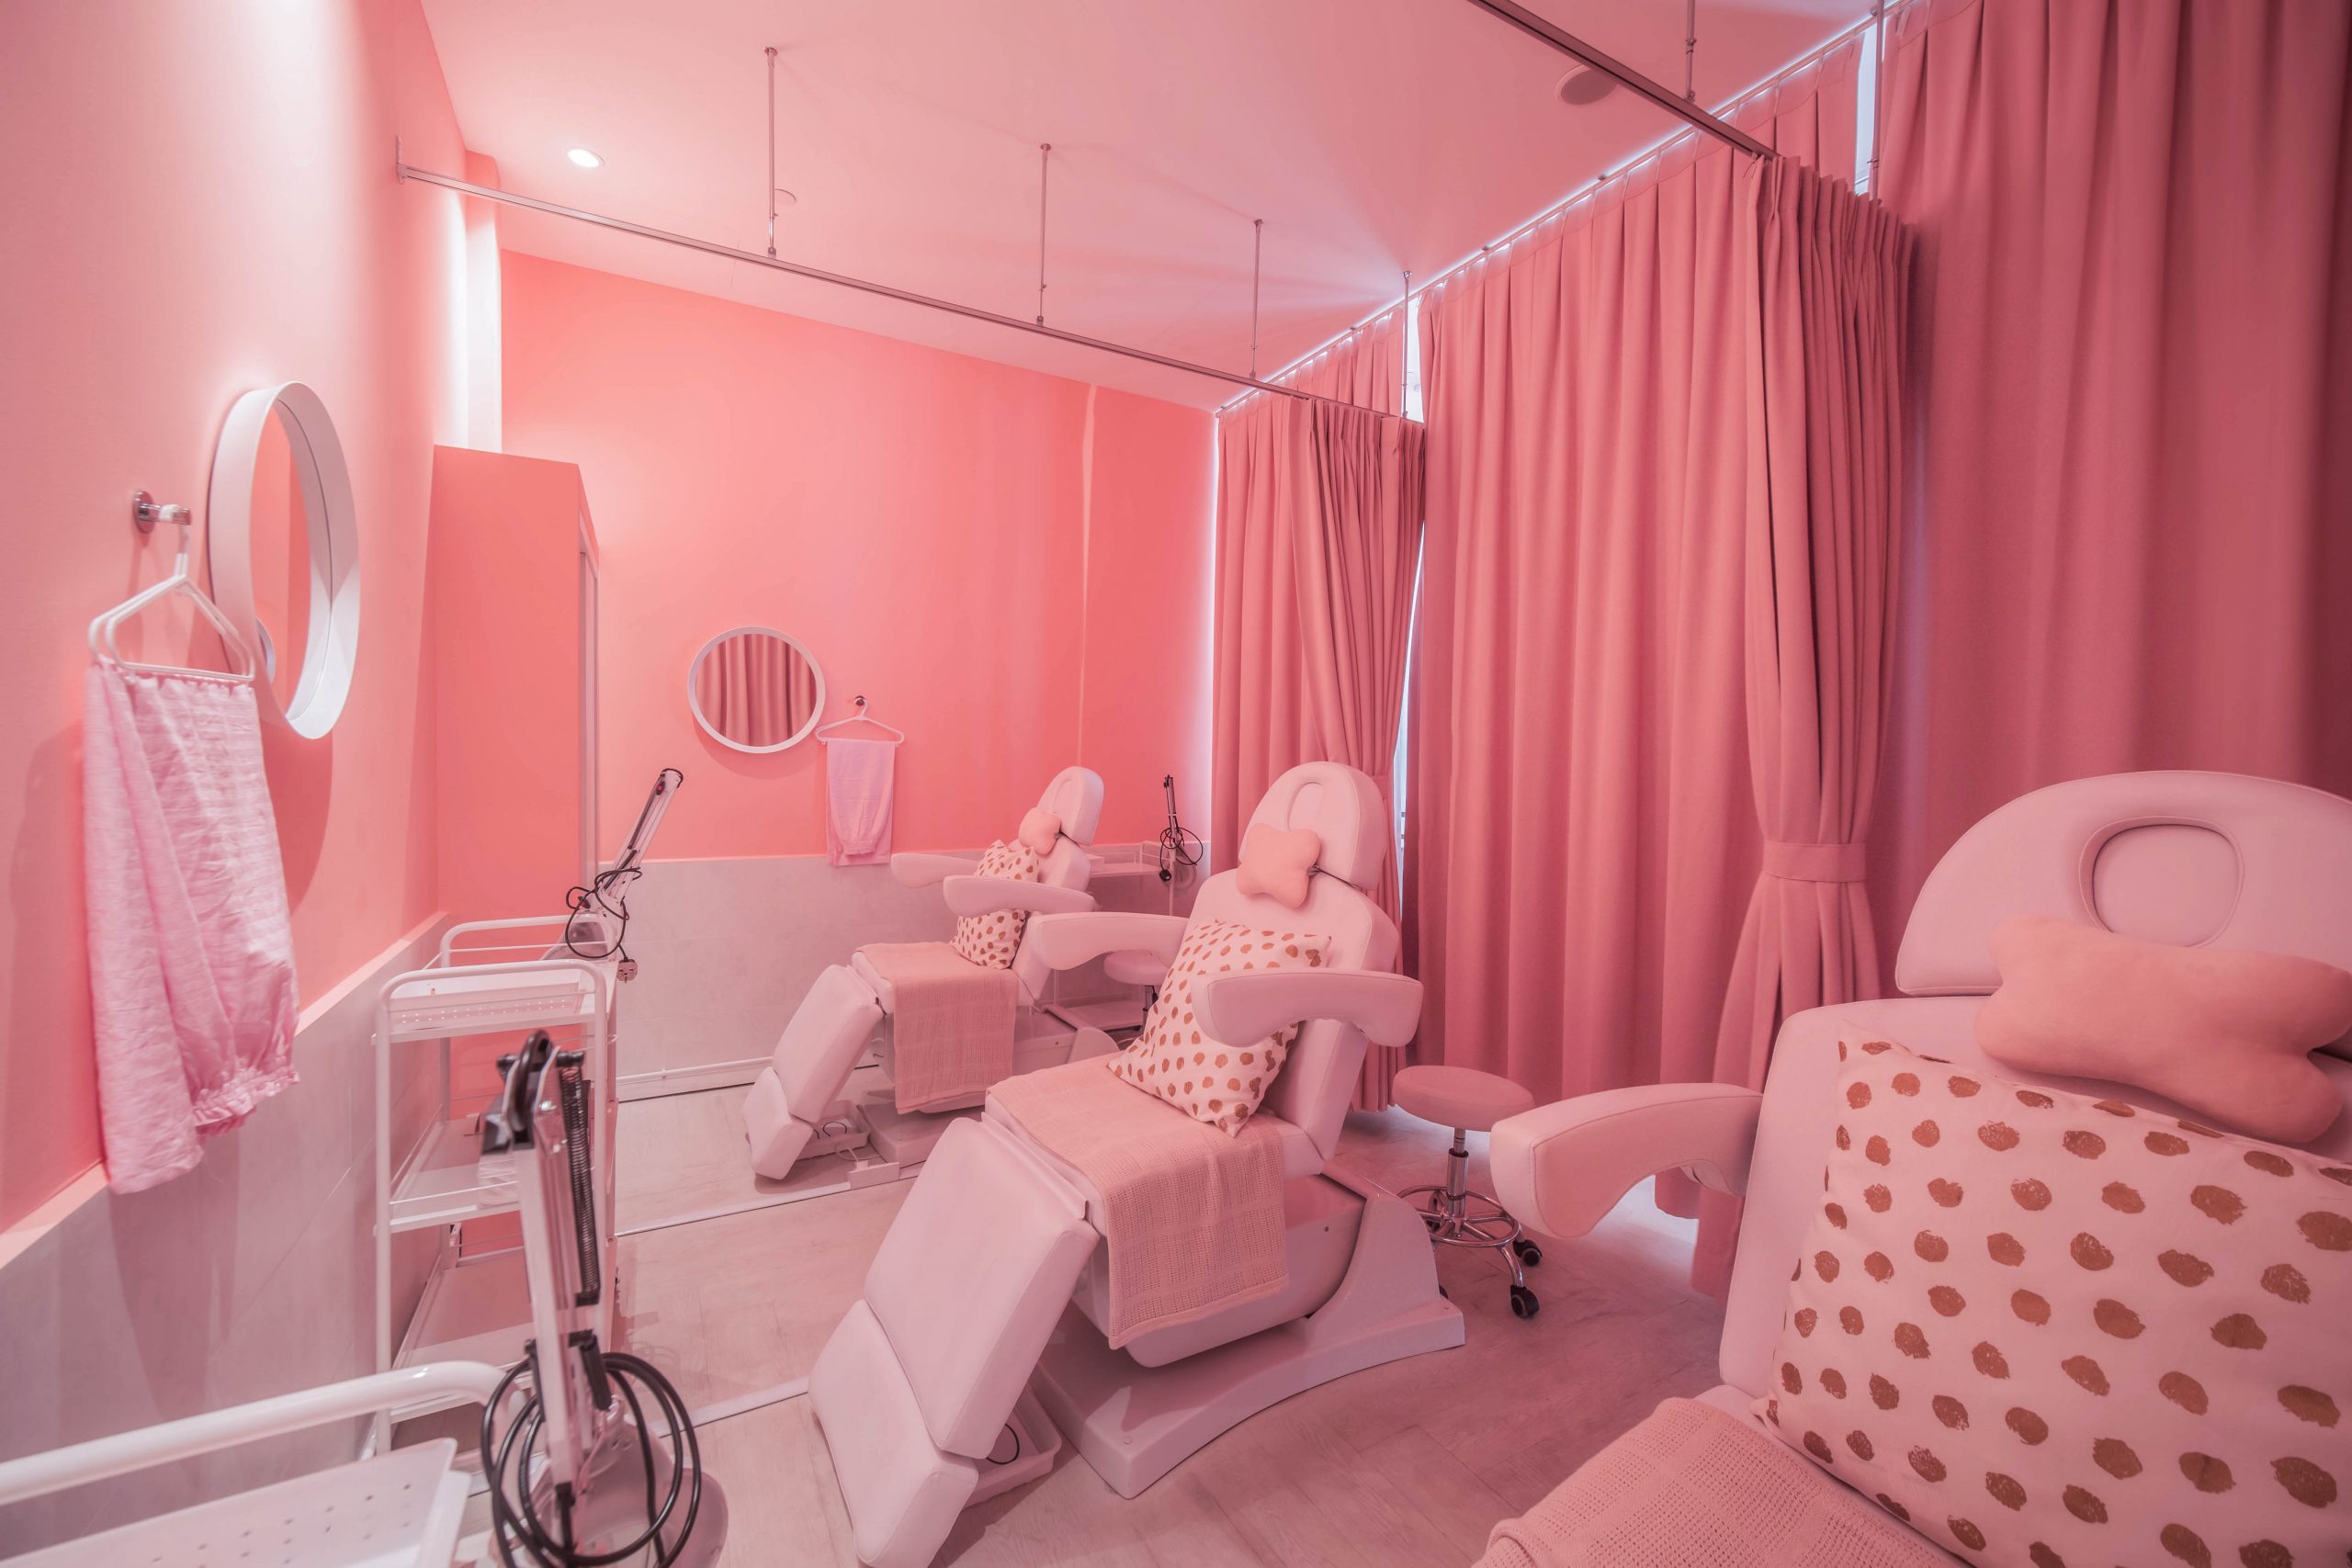 Peachy Skin Bar: Dreamy Pink Space Designed by Lucas Ong